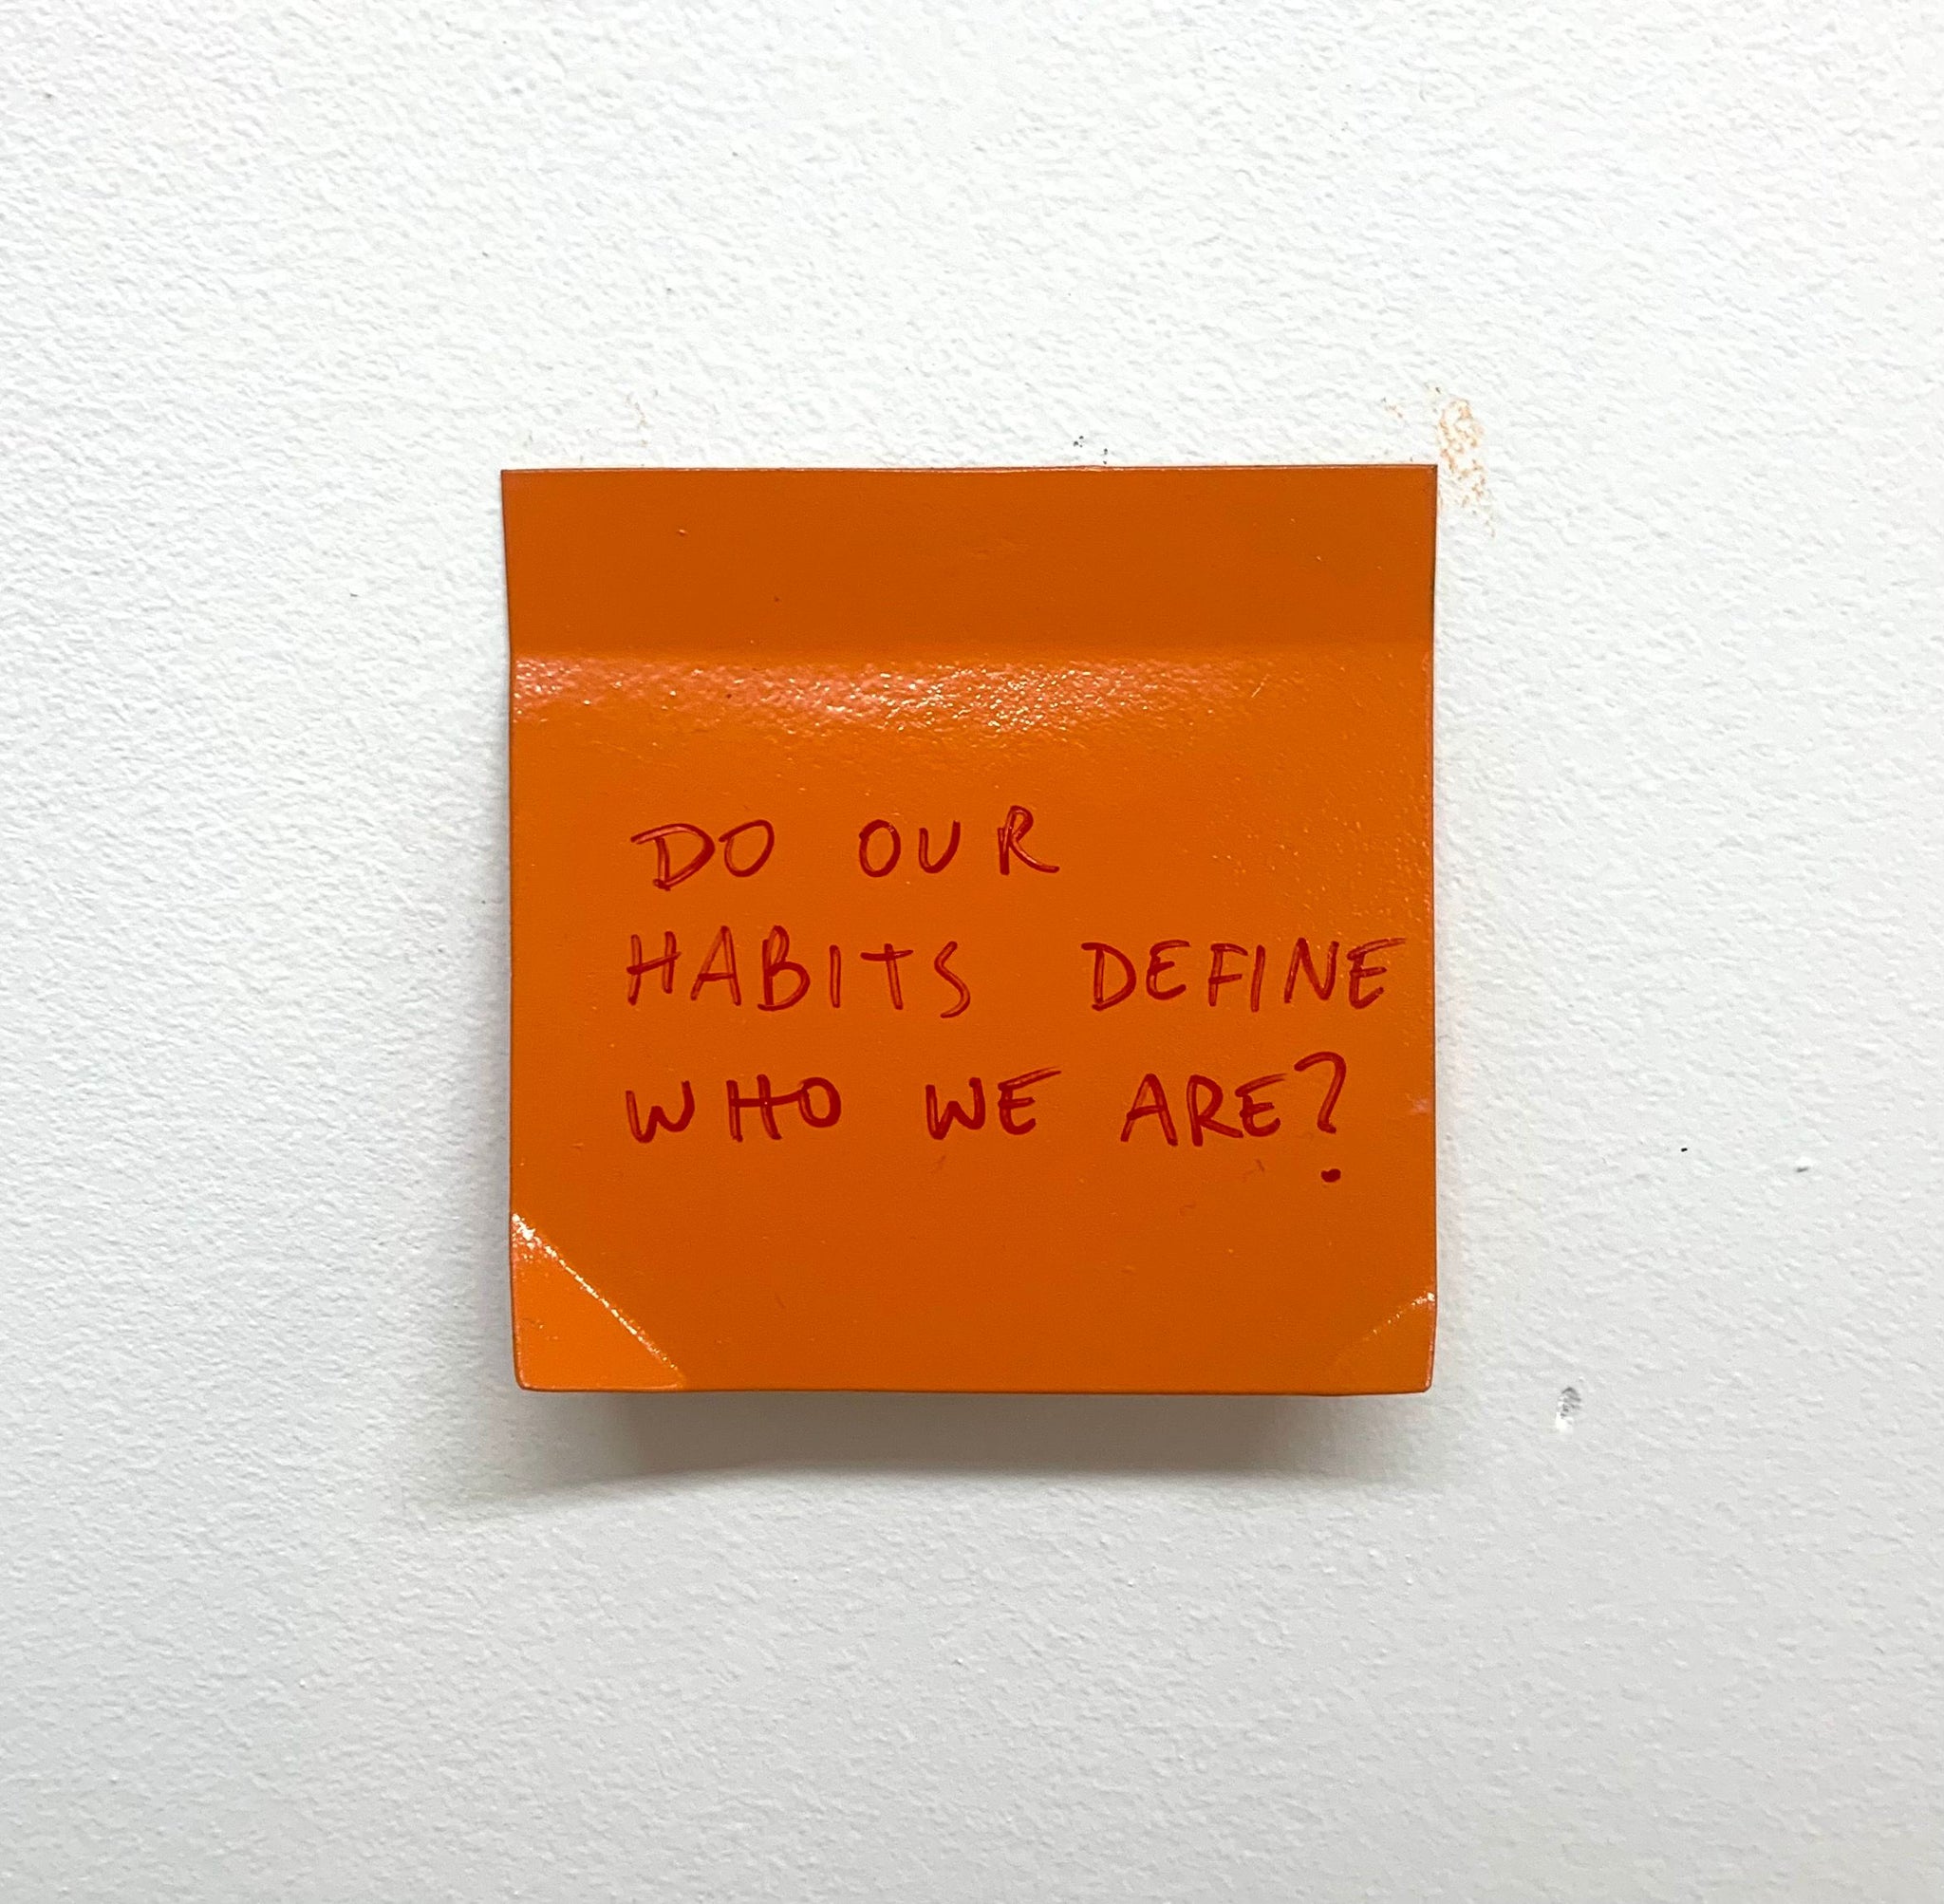 Stuart Lantry, "Do our habits define who we are?"